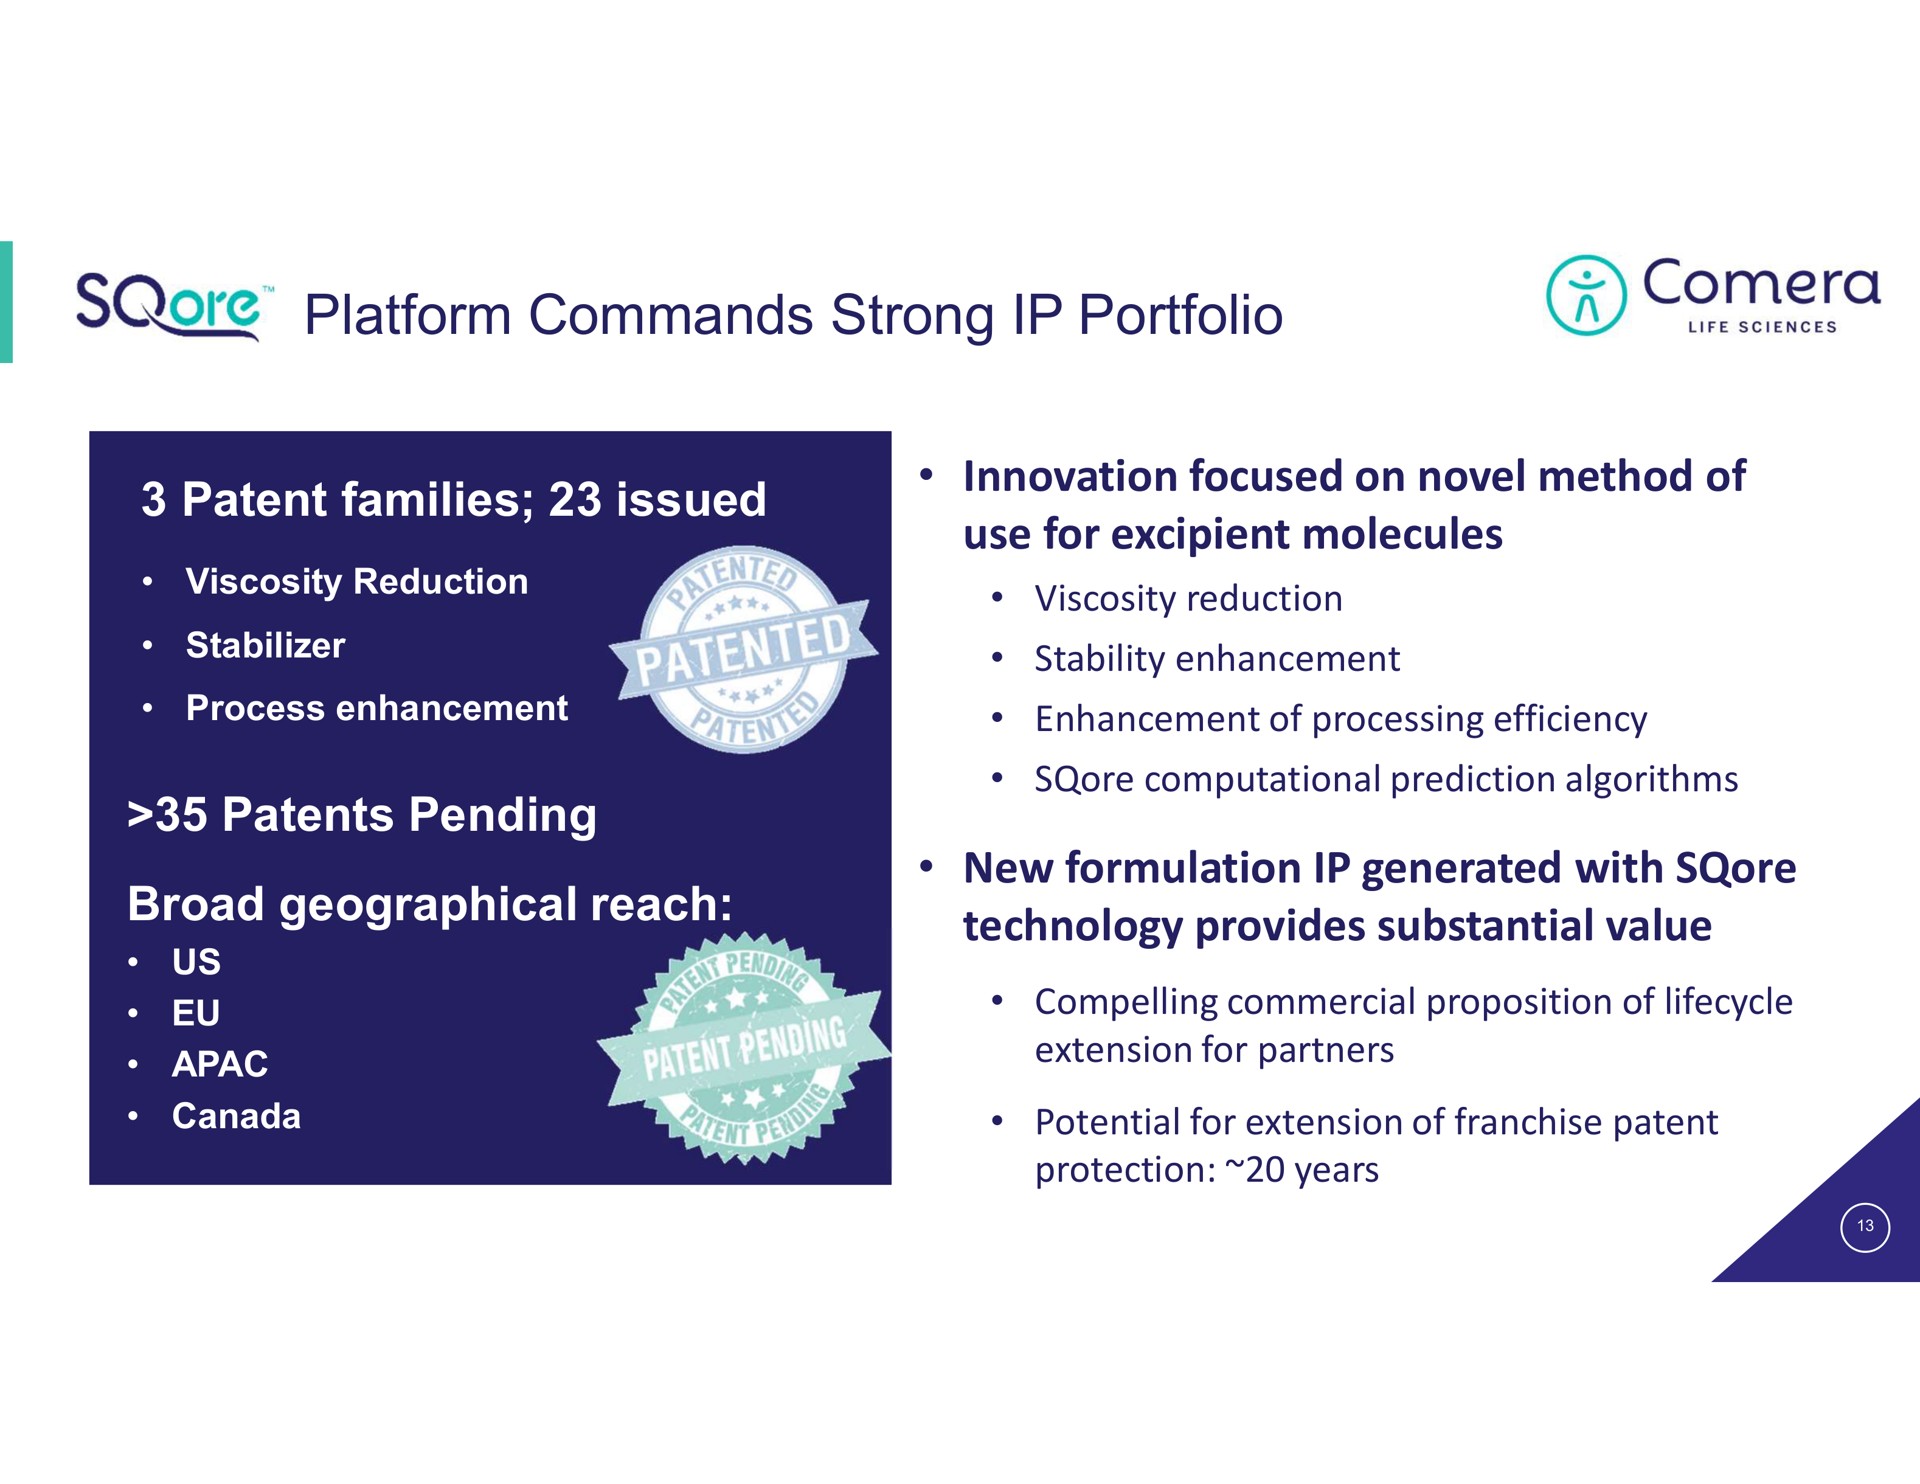 platform commands strong portfolio patent families issued patents pending broad geographical reach innovation focused on novel method of use for excipient molecules new formulation generated with technology provides substantial value | Comera